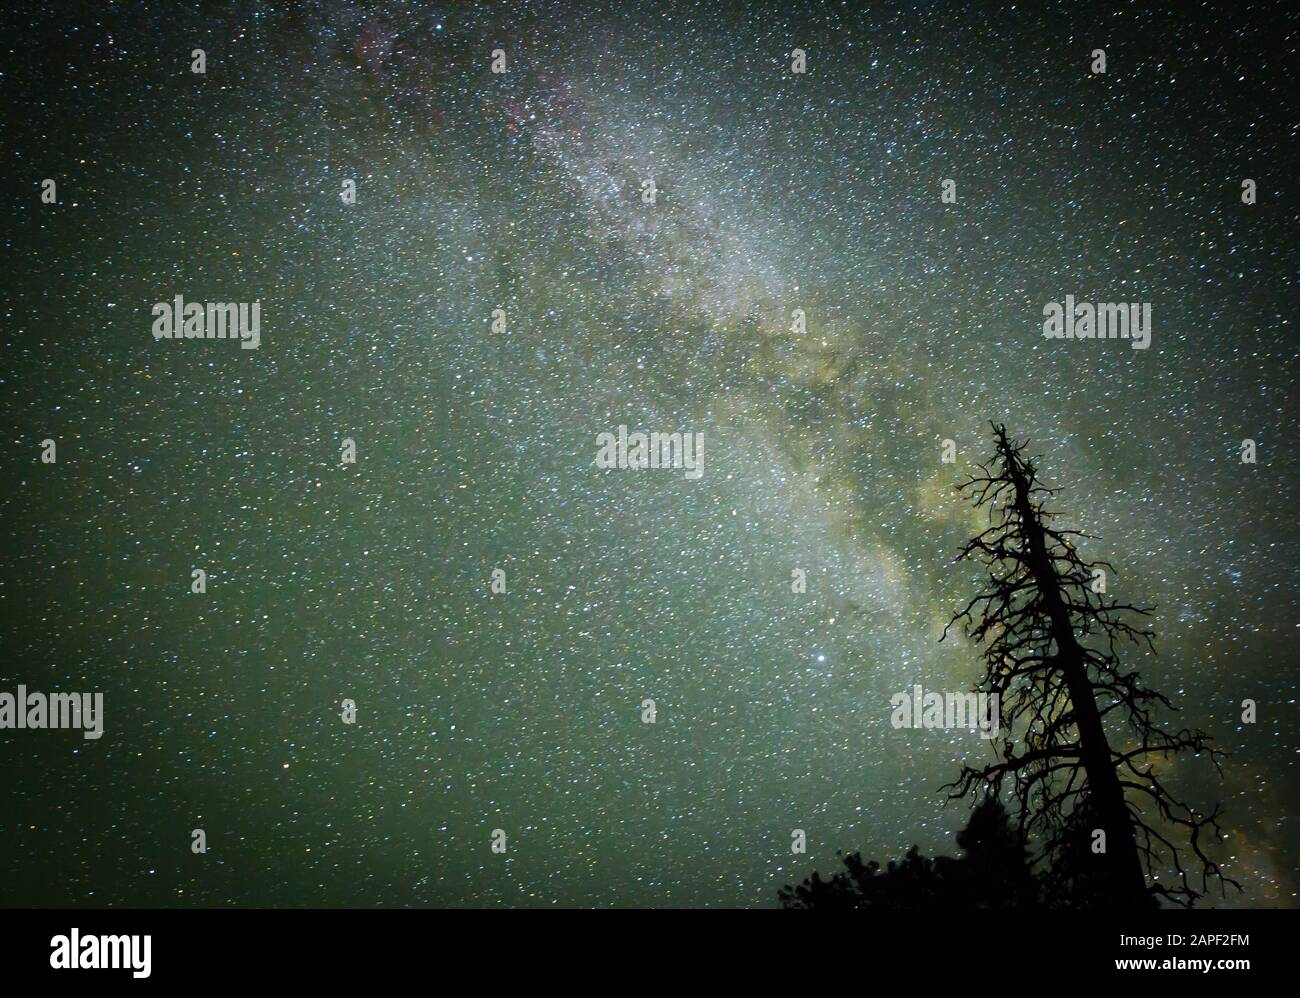 The Milky Way galaxy shines brightly over a dead pine tree. Stock Photo